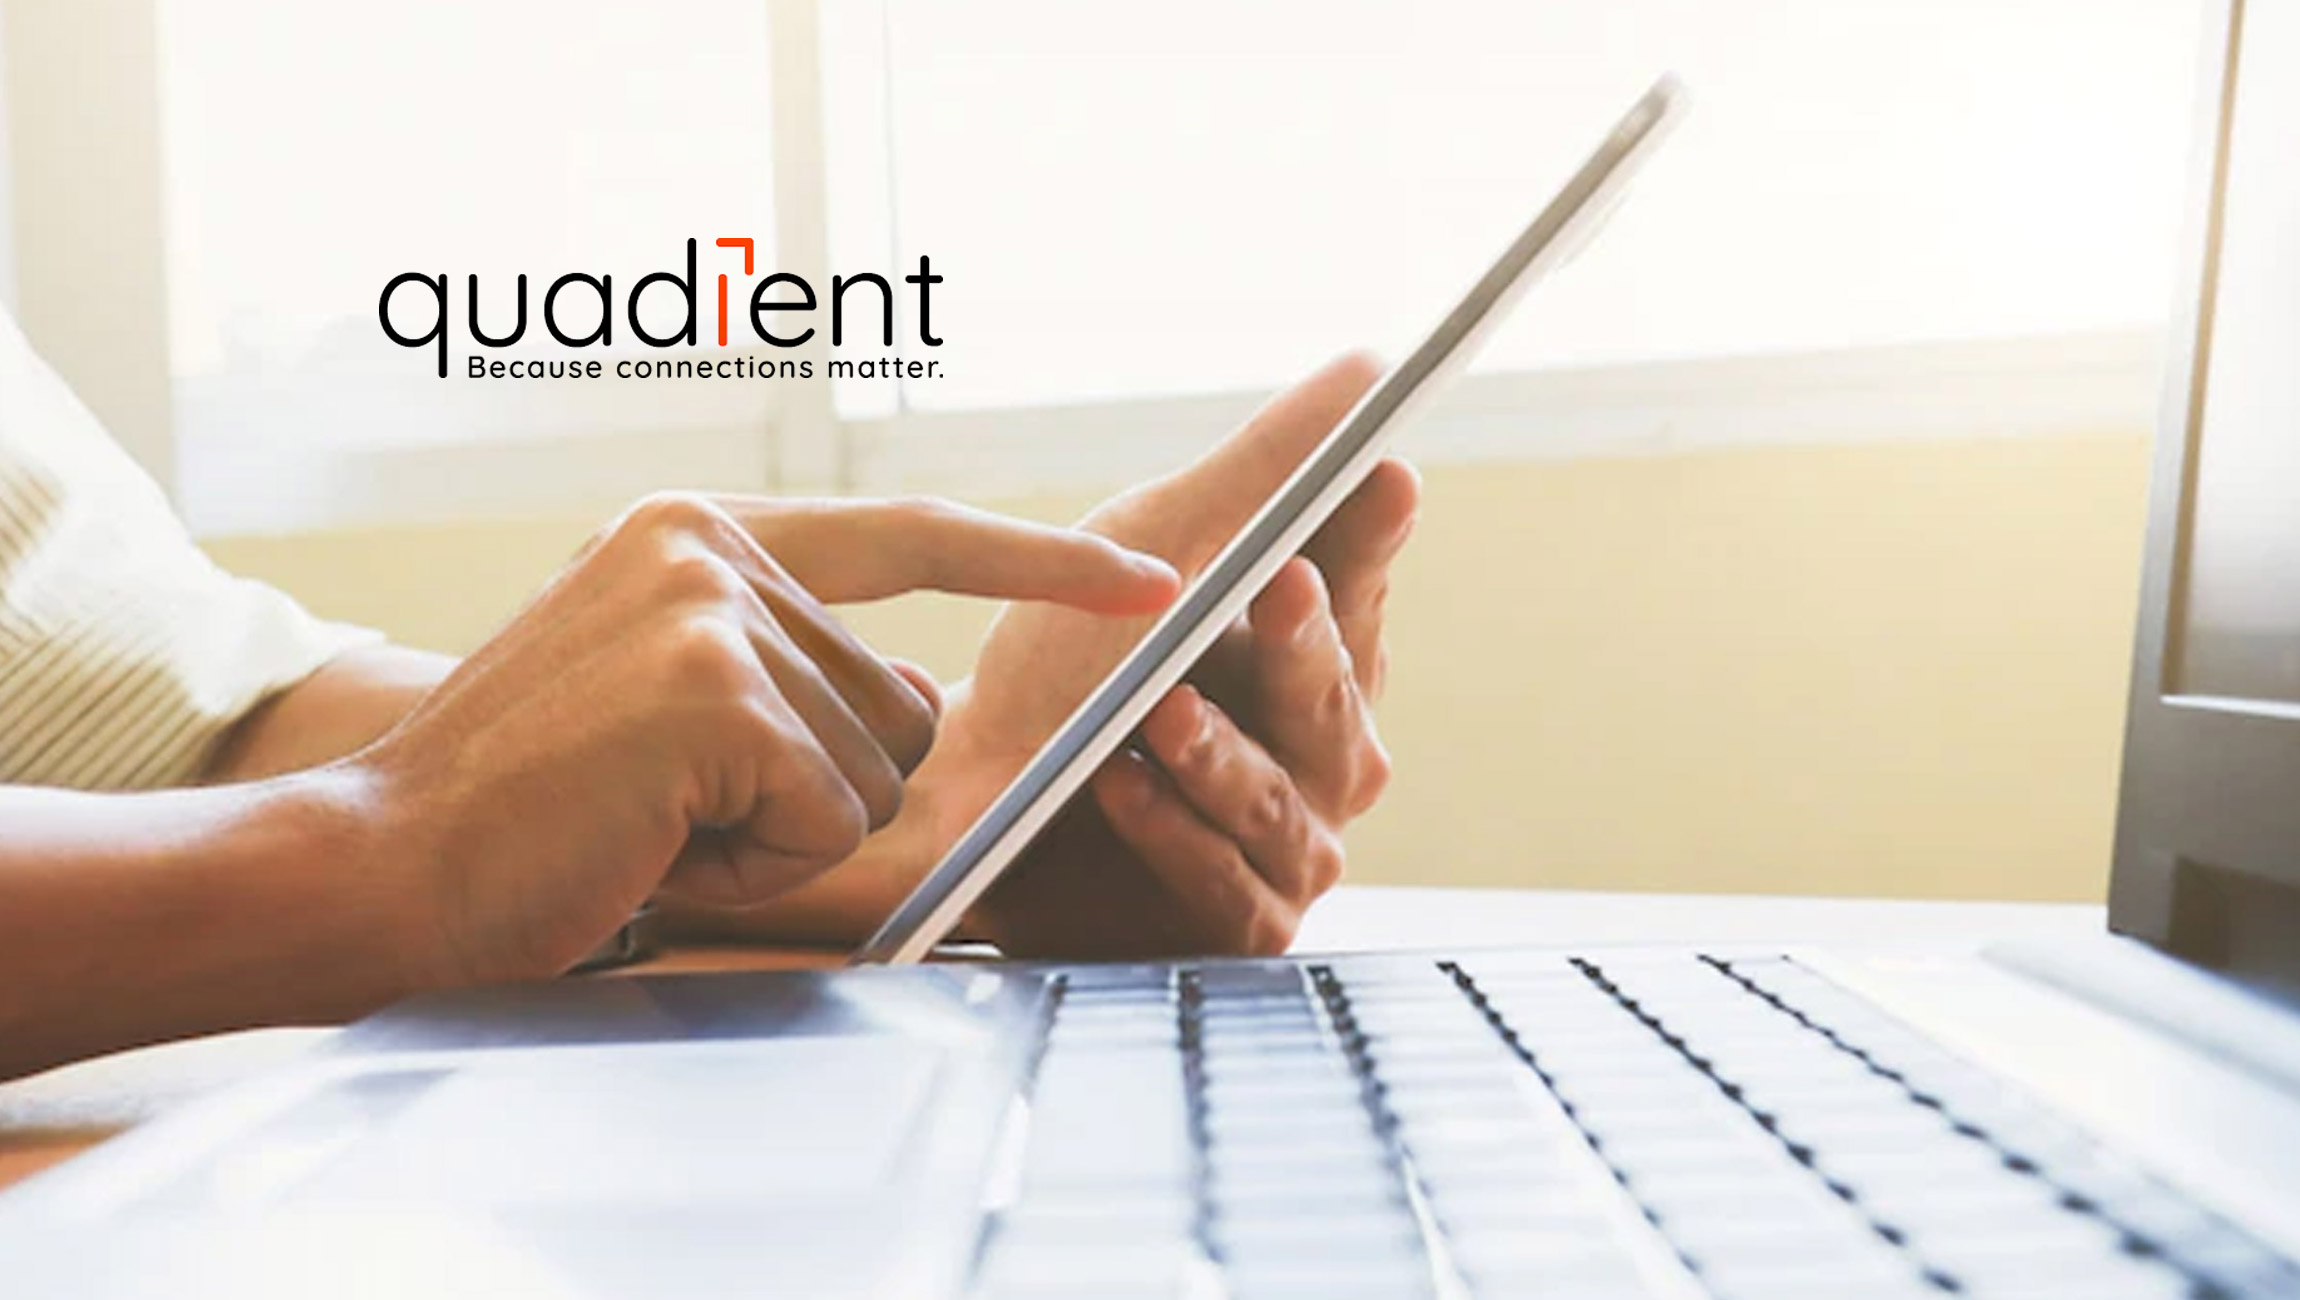 Quadient Expands Impress Platform in Ireland With Cloud-Based Document Delivery Solution, Quadient Impress Distribute